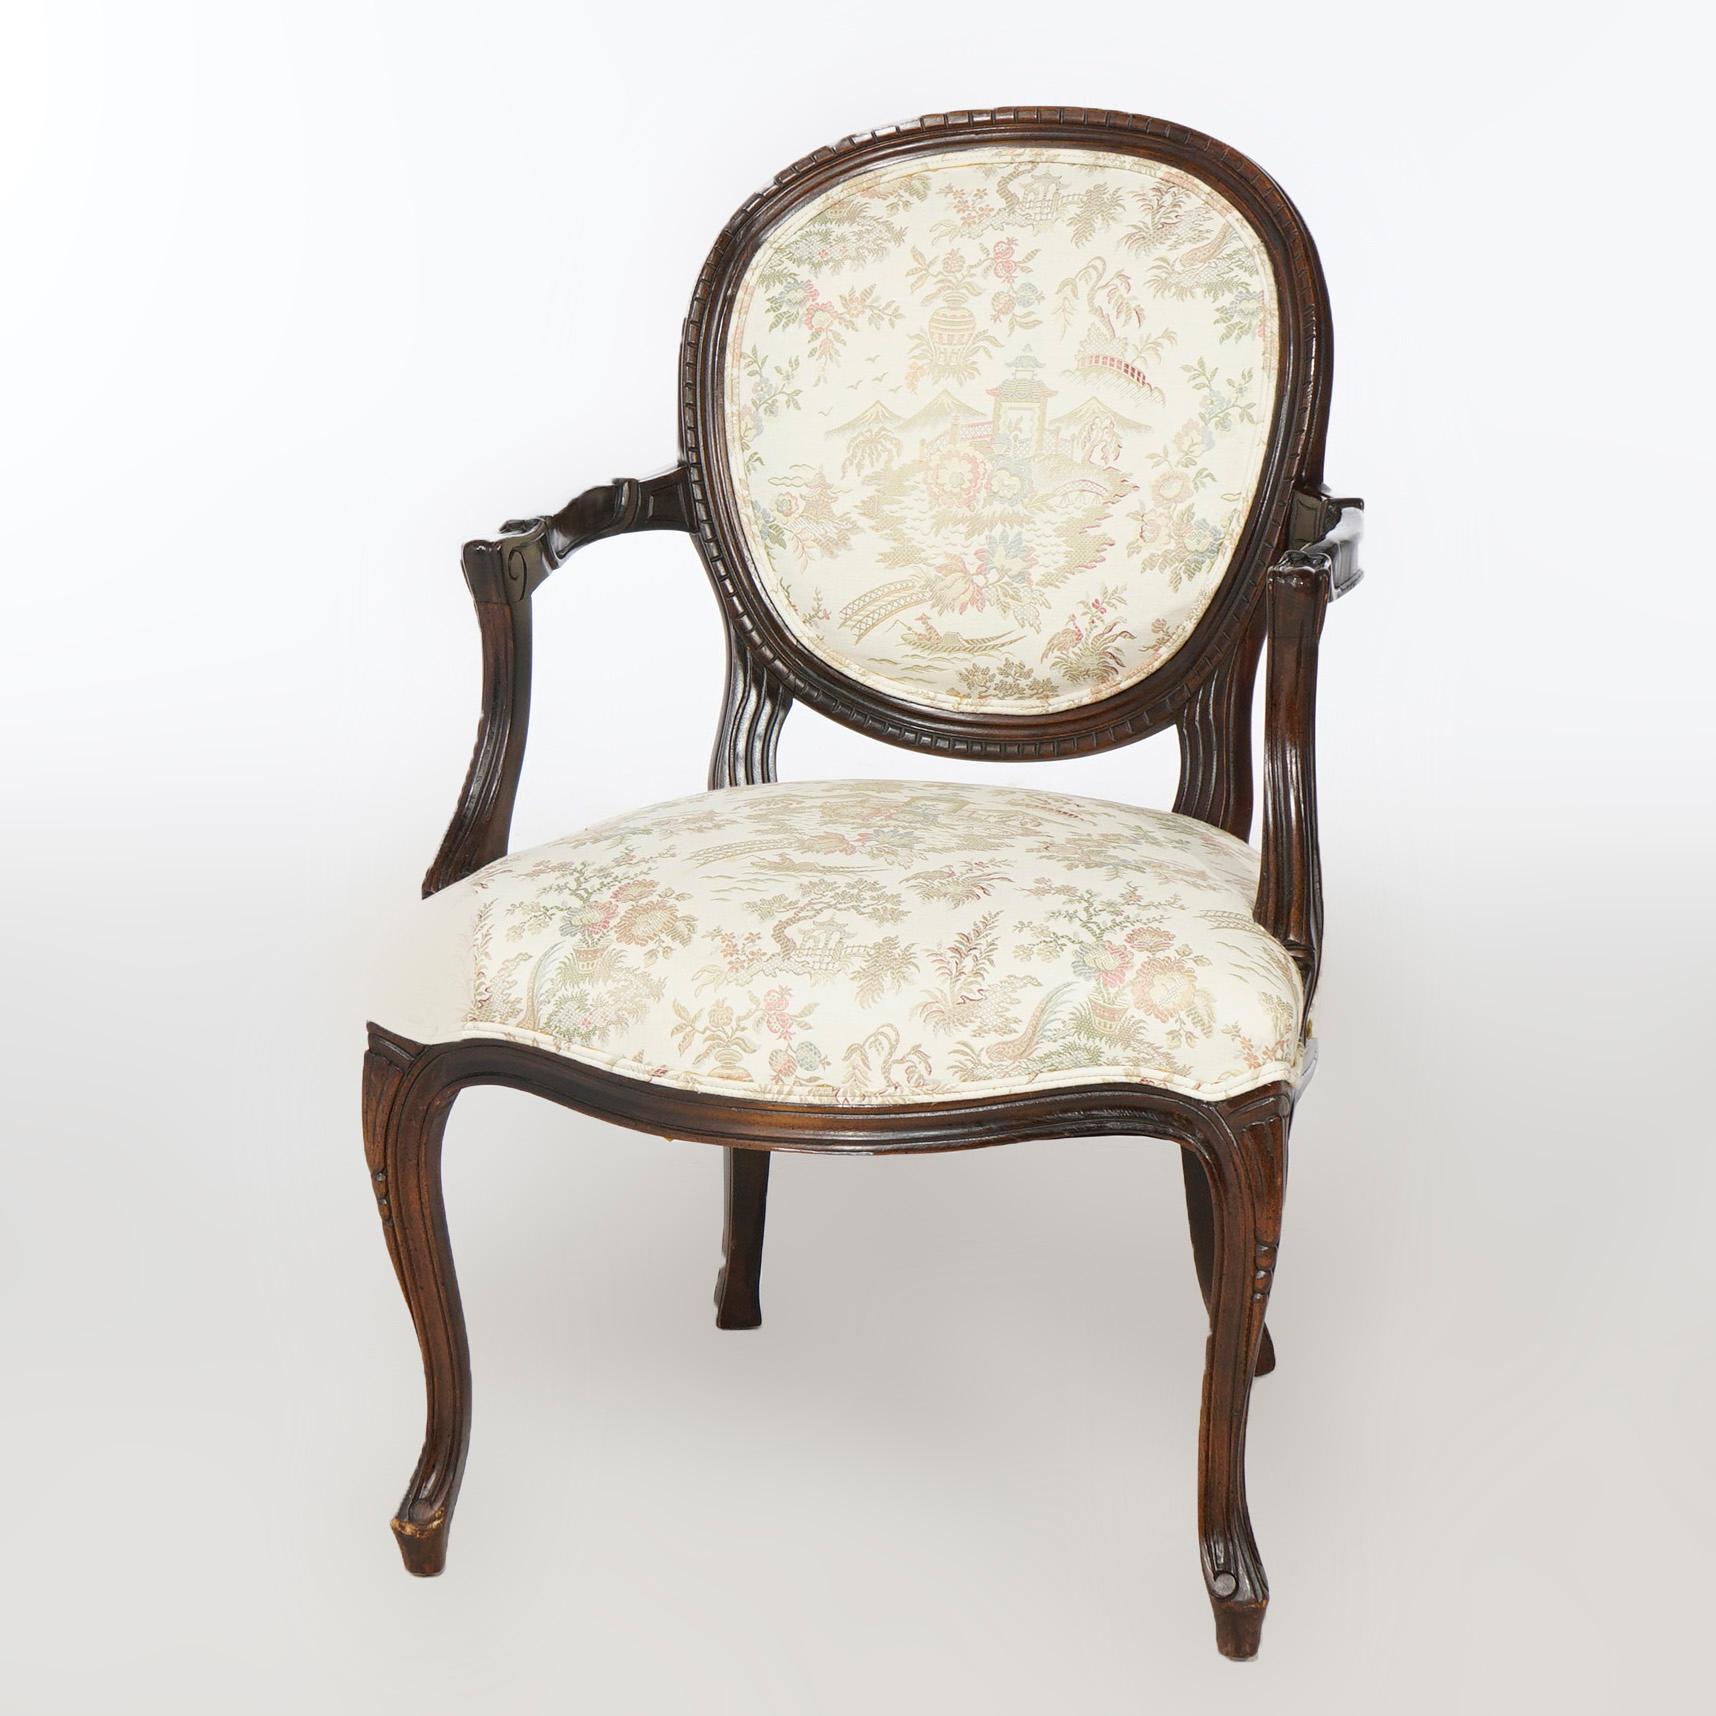 A pair of French style side chairs offer mahogany frames with upholstered backs and seats, scroll form arms and raised on cabriole legs, 20th century

Measures- 35''H x 22.5''W x 28''D; seat height 19.5